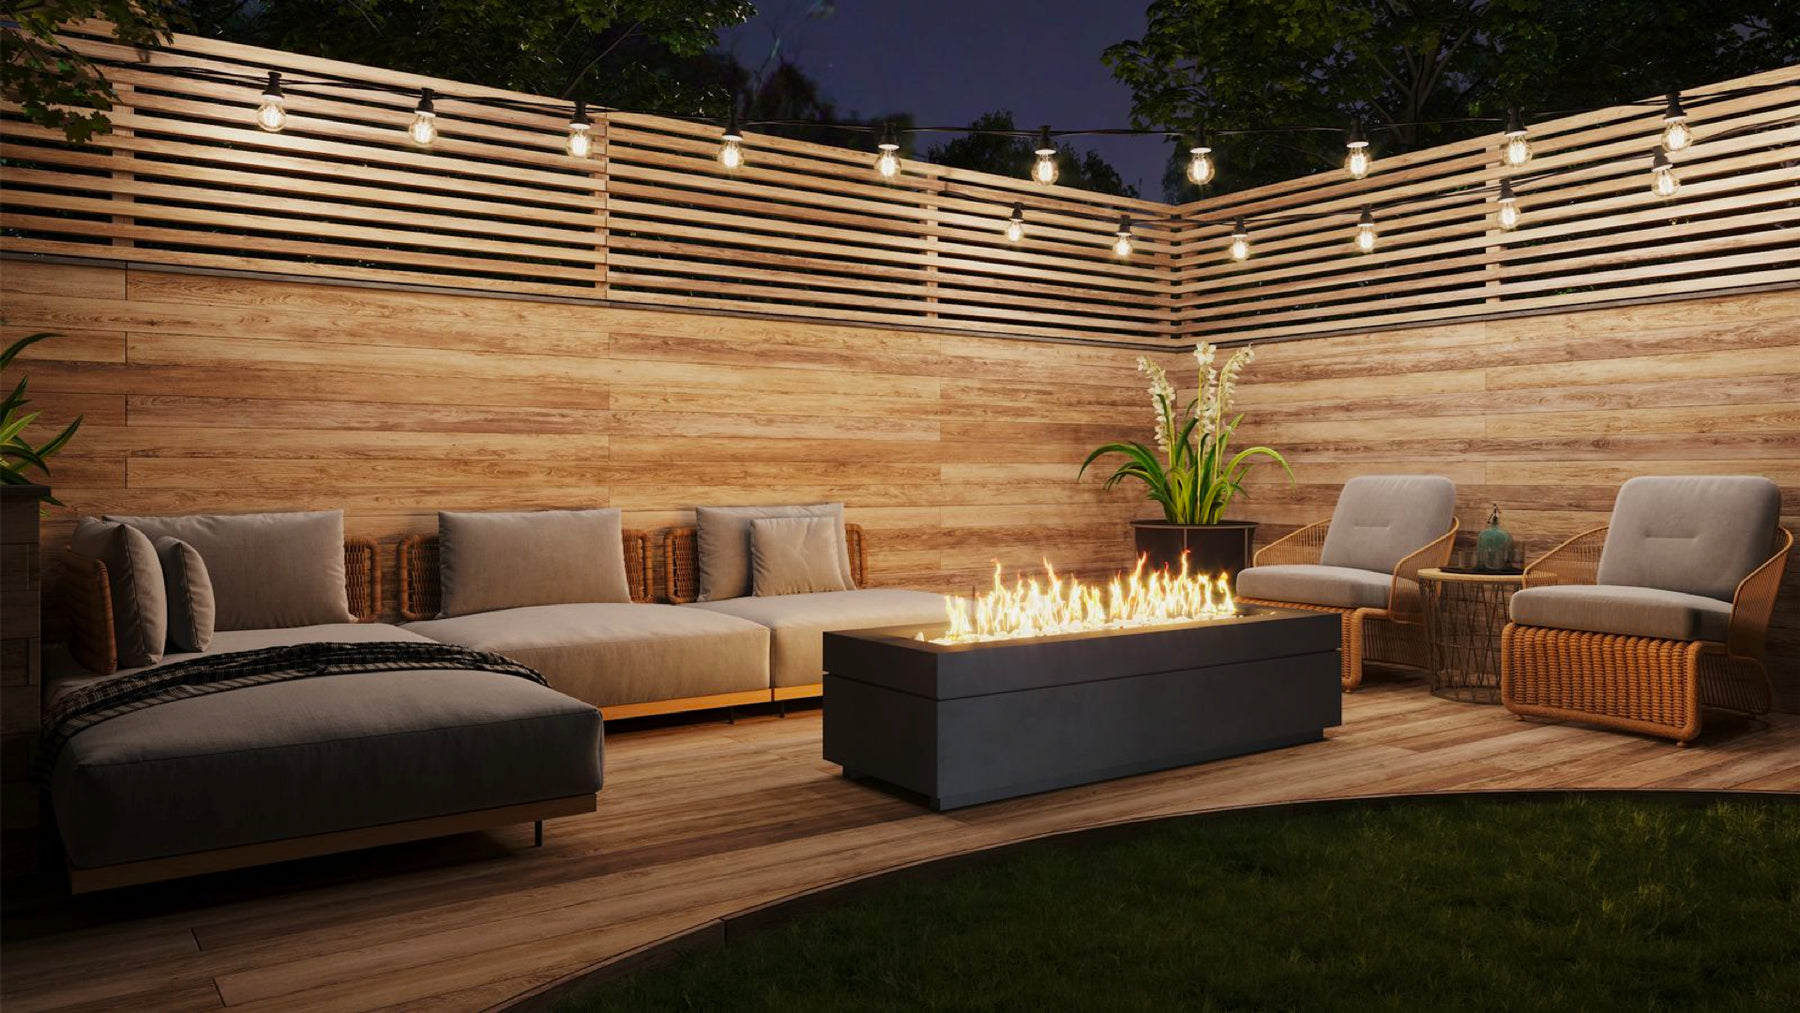 Boxhill's Linea fire pit burns bright as the centerpiece on a backyard deck with wooden privacy wall and string lights.